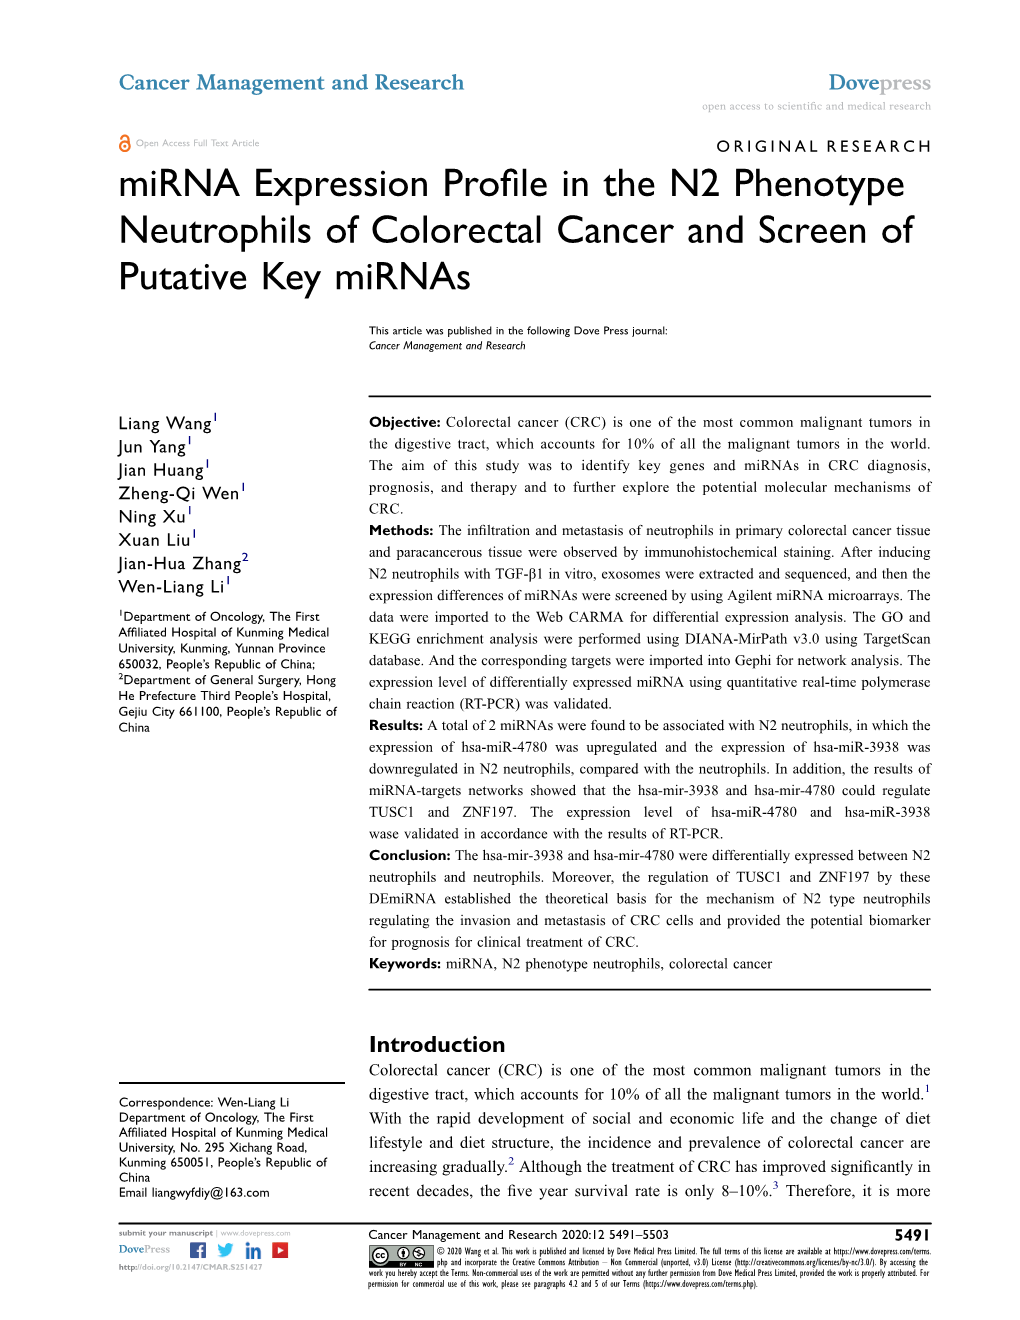 Mirna Expression Profile in the N2 Phenotype Neutrophils Of